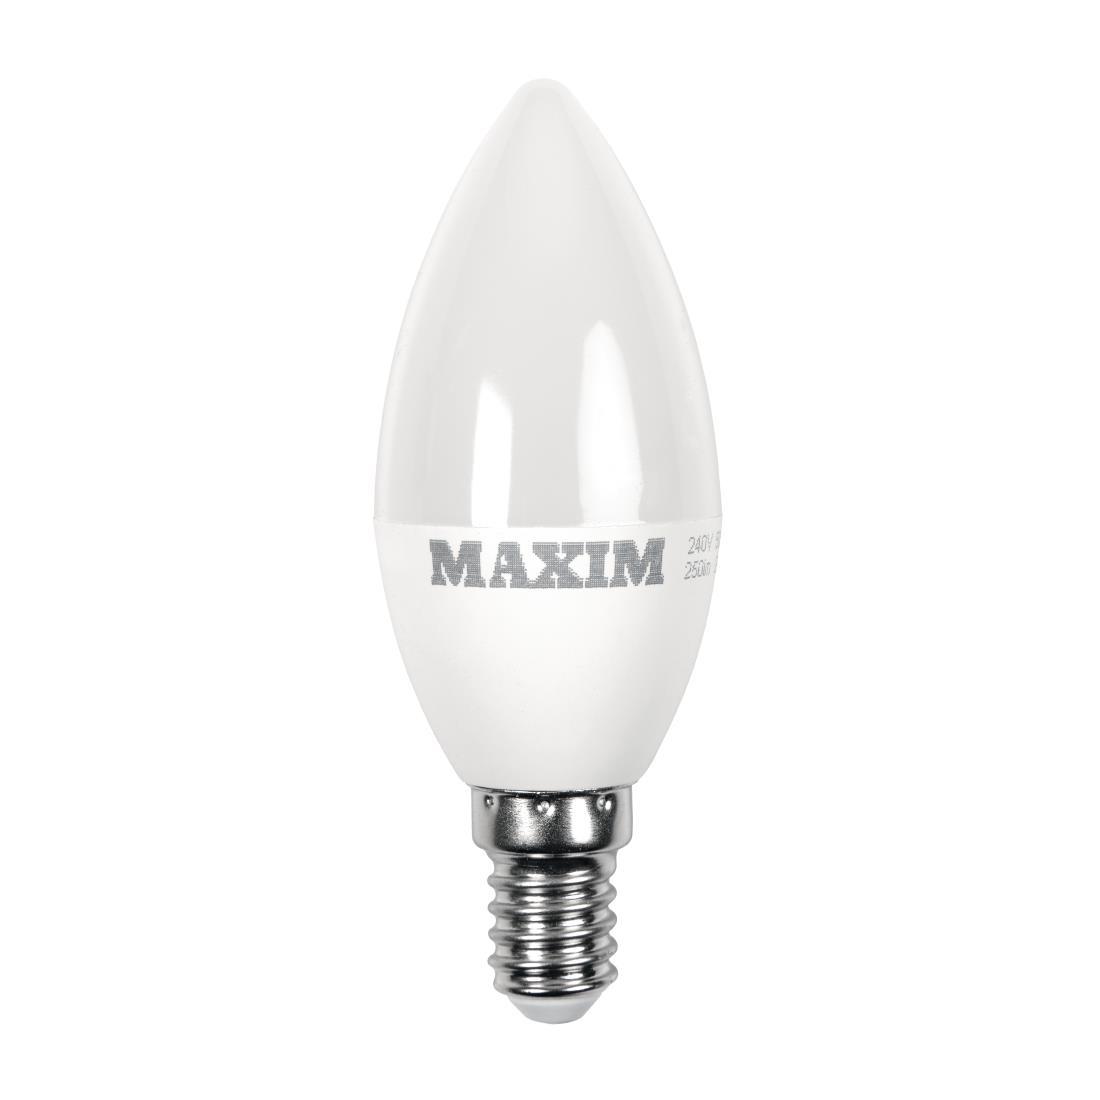 Maxim LED Candle Small Edison Screw Cool White 3W (Pack of 10)